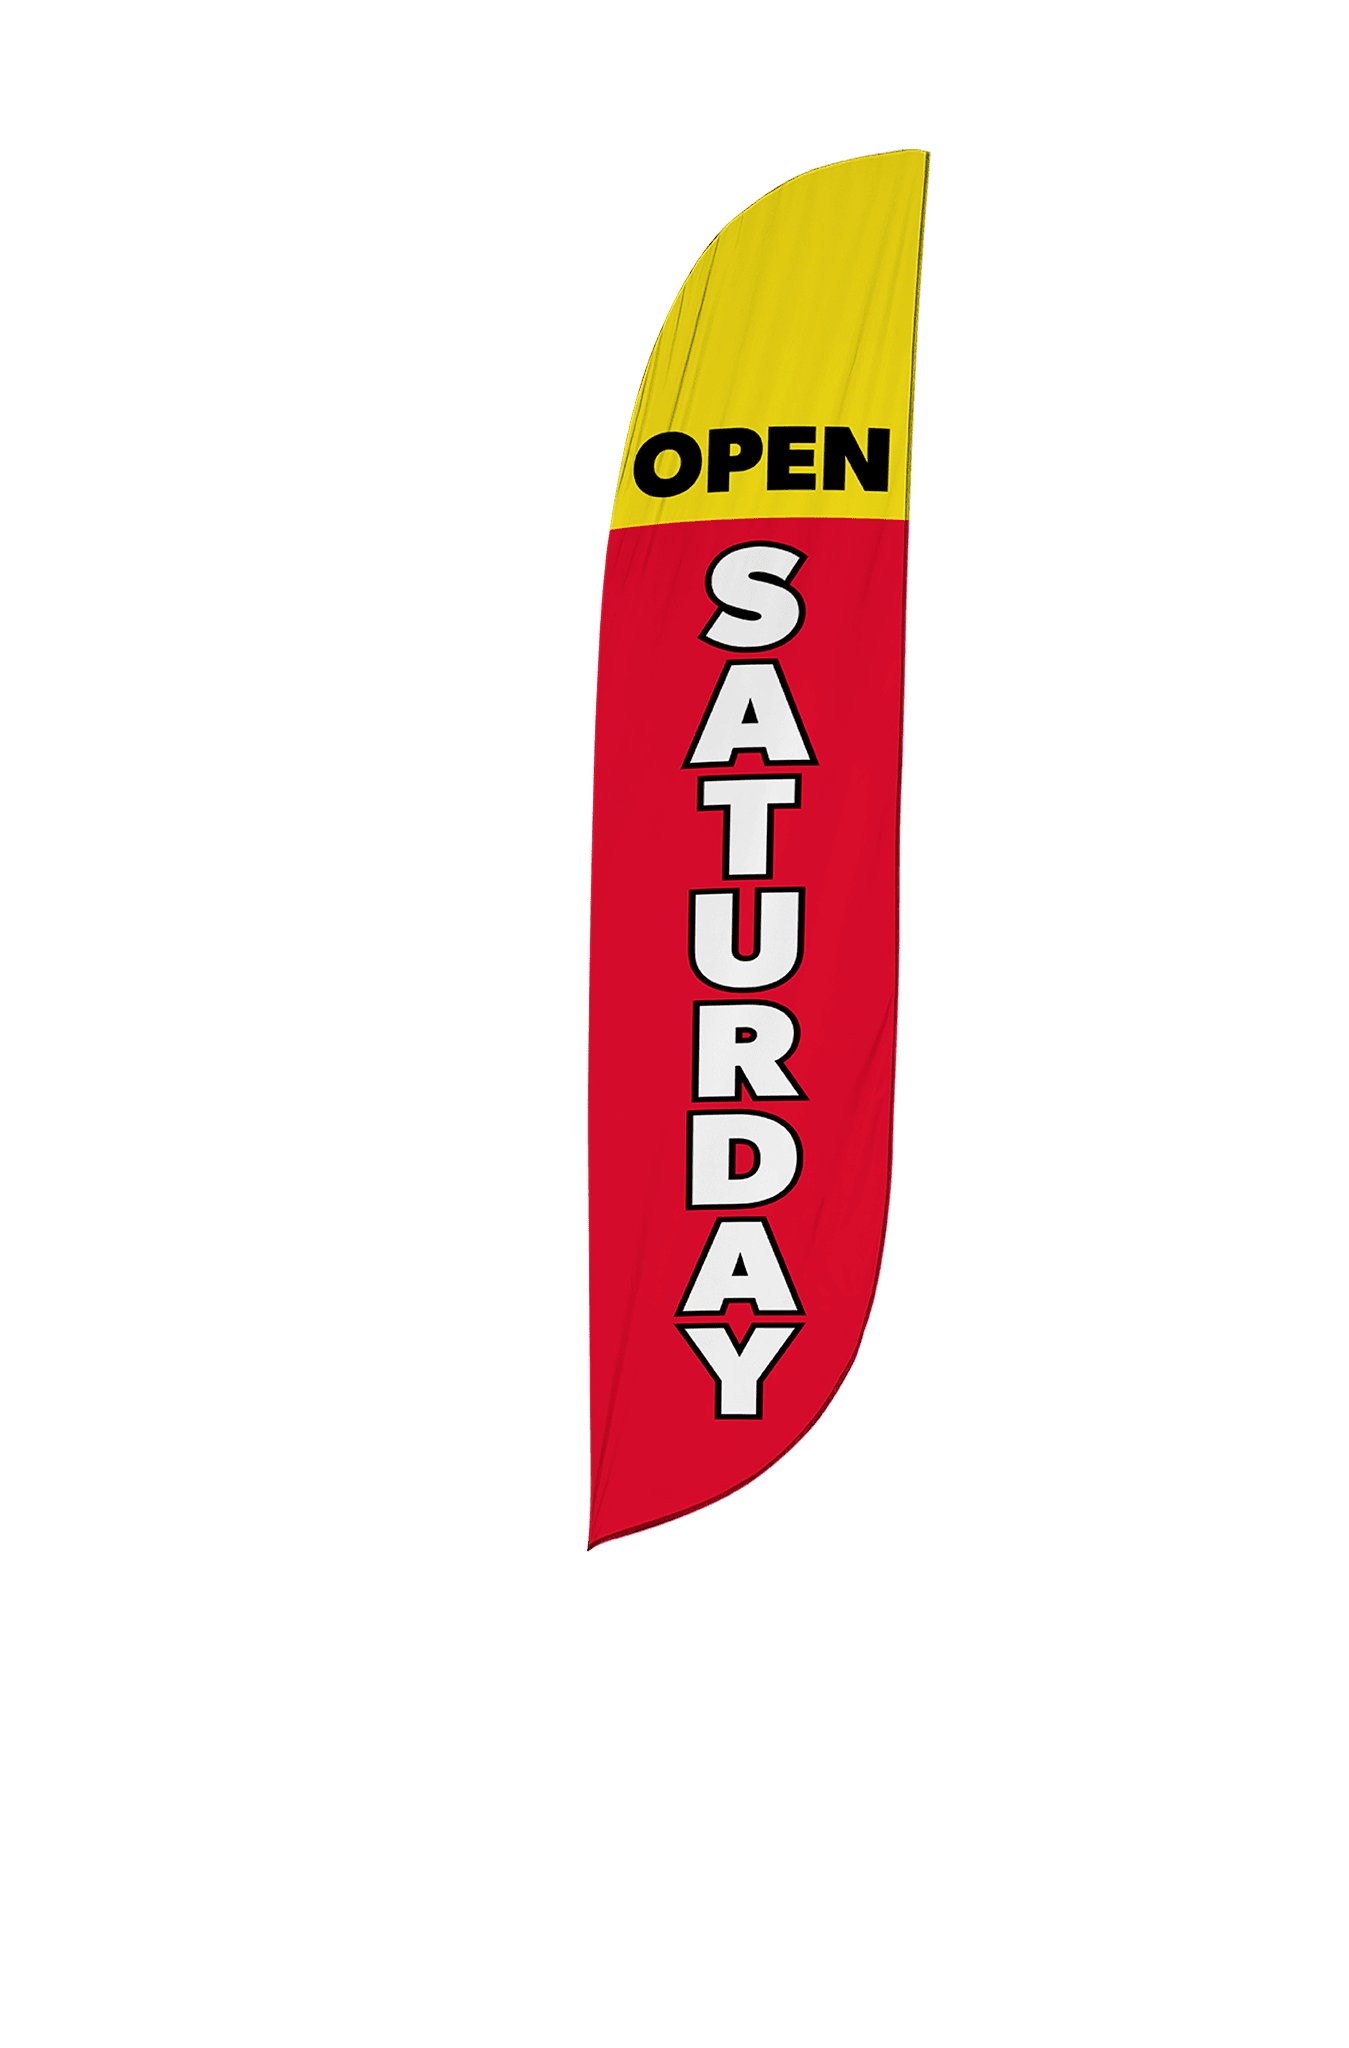 Open Saturday Feather Flag 